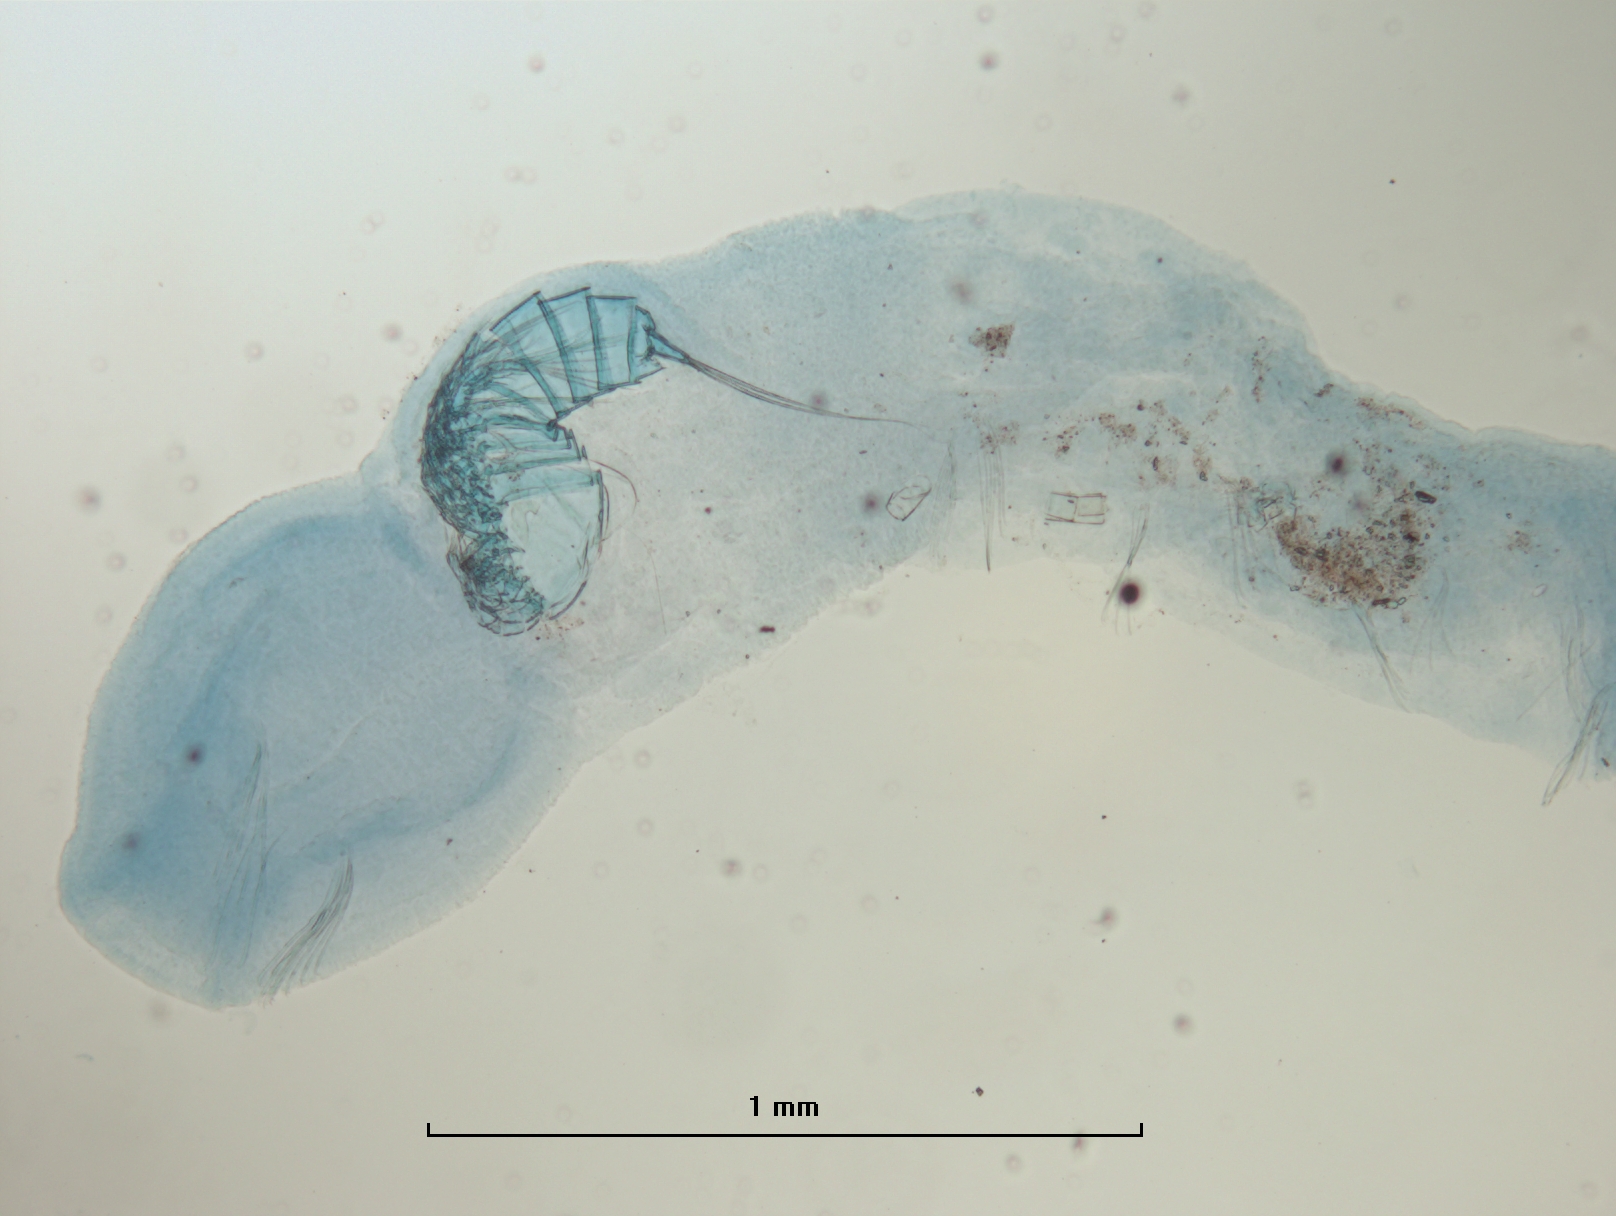 Photomicrograph of a worm with a large mouth, and a small crustacean is inside.